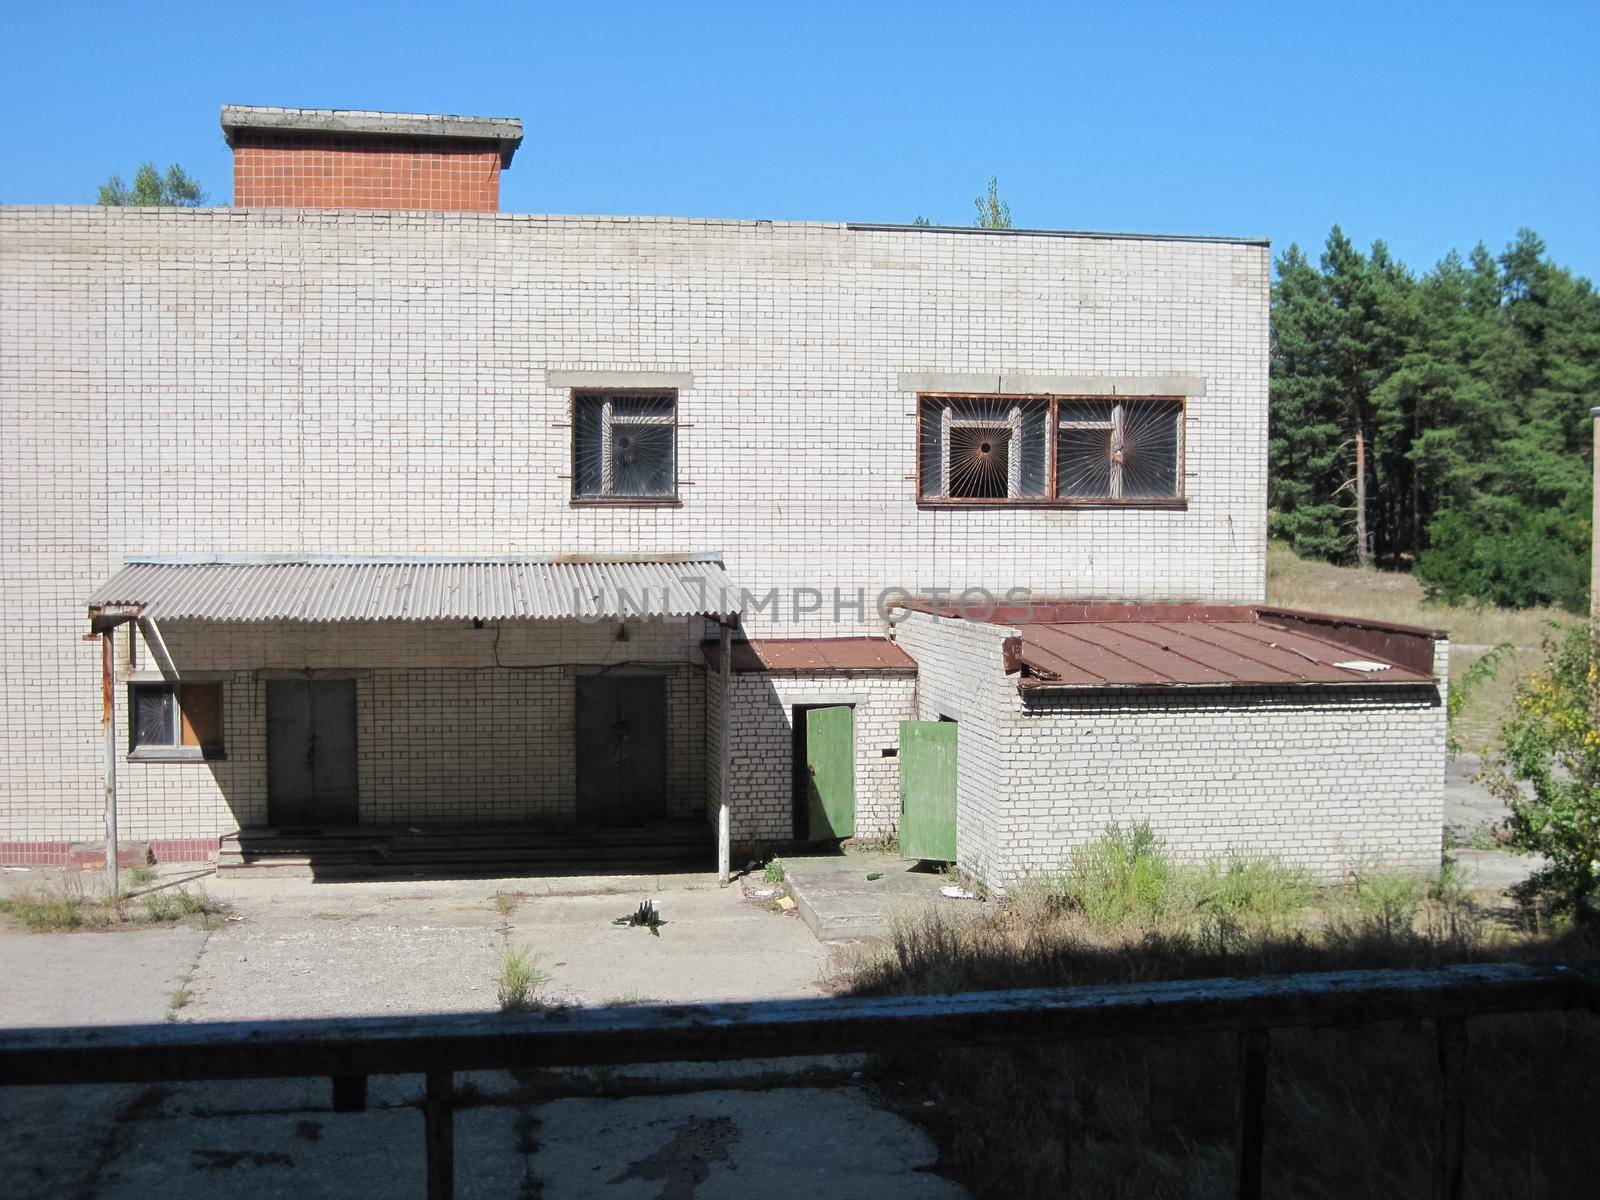 Abandoned residential buildings in village of Orbita near the Chyhyryn Nuclear Power Plant. Abandoned and destroyed. by DePo